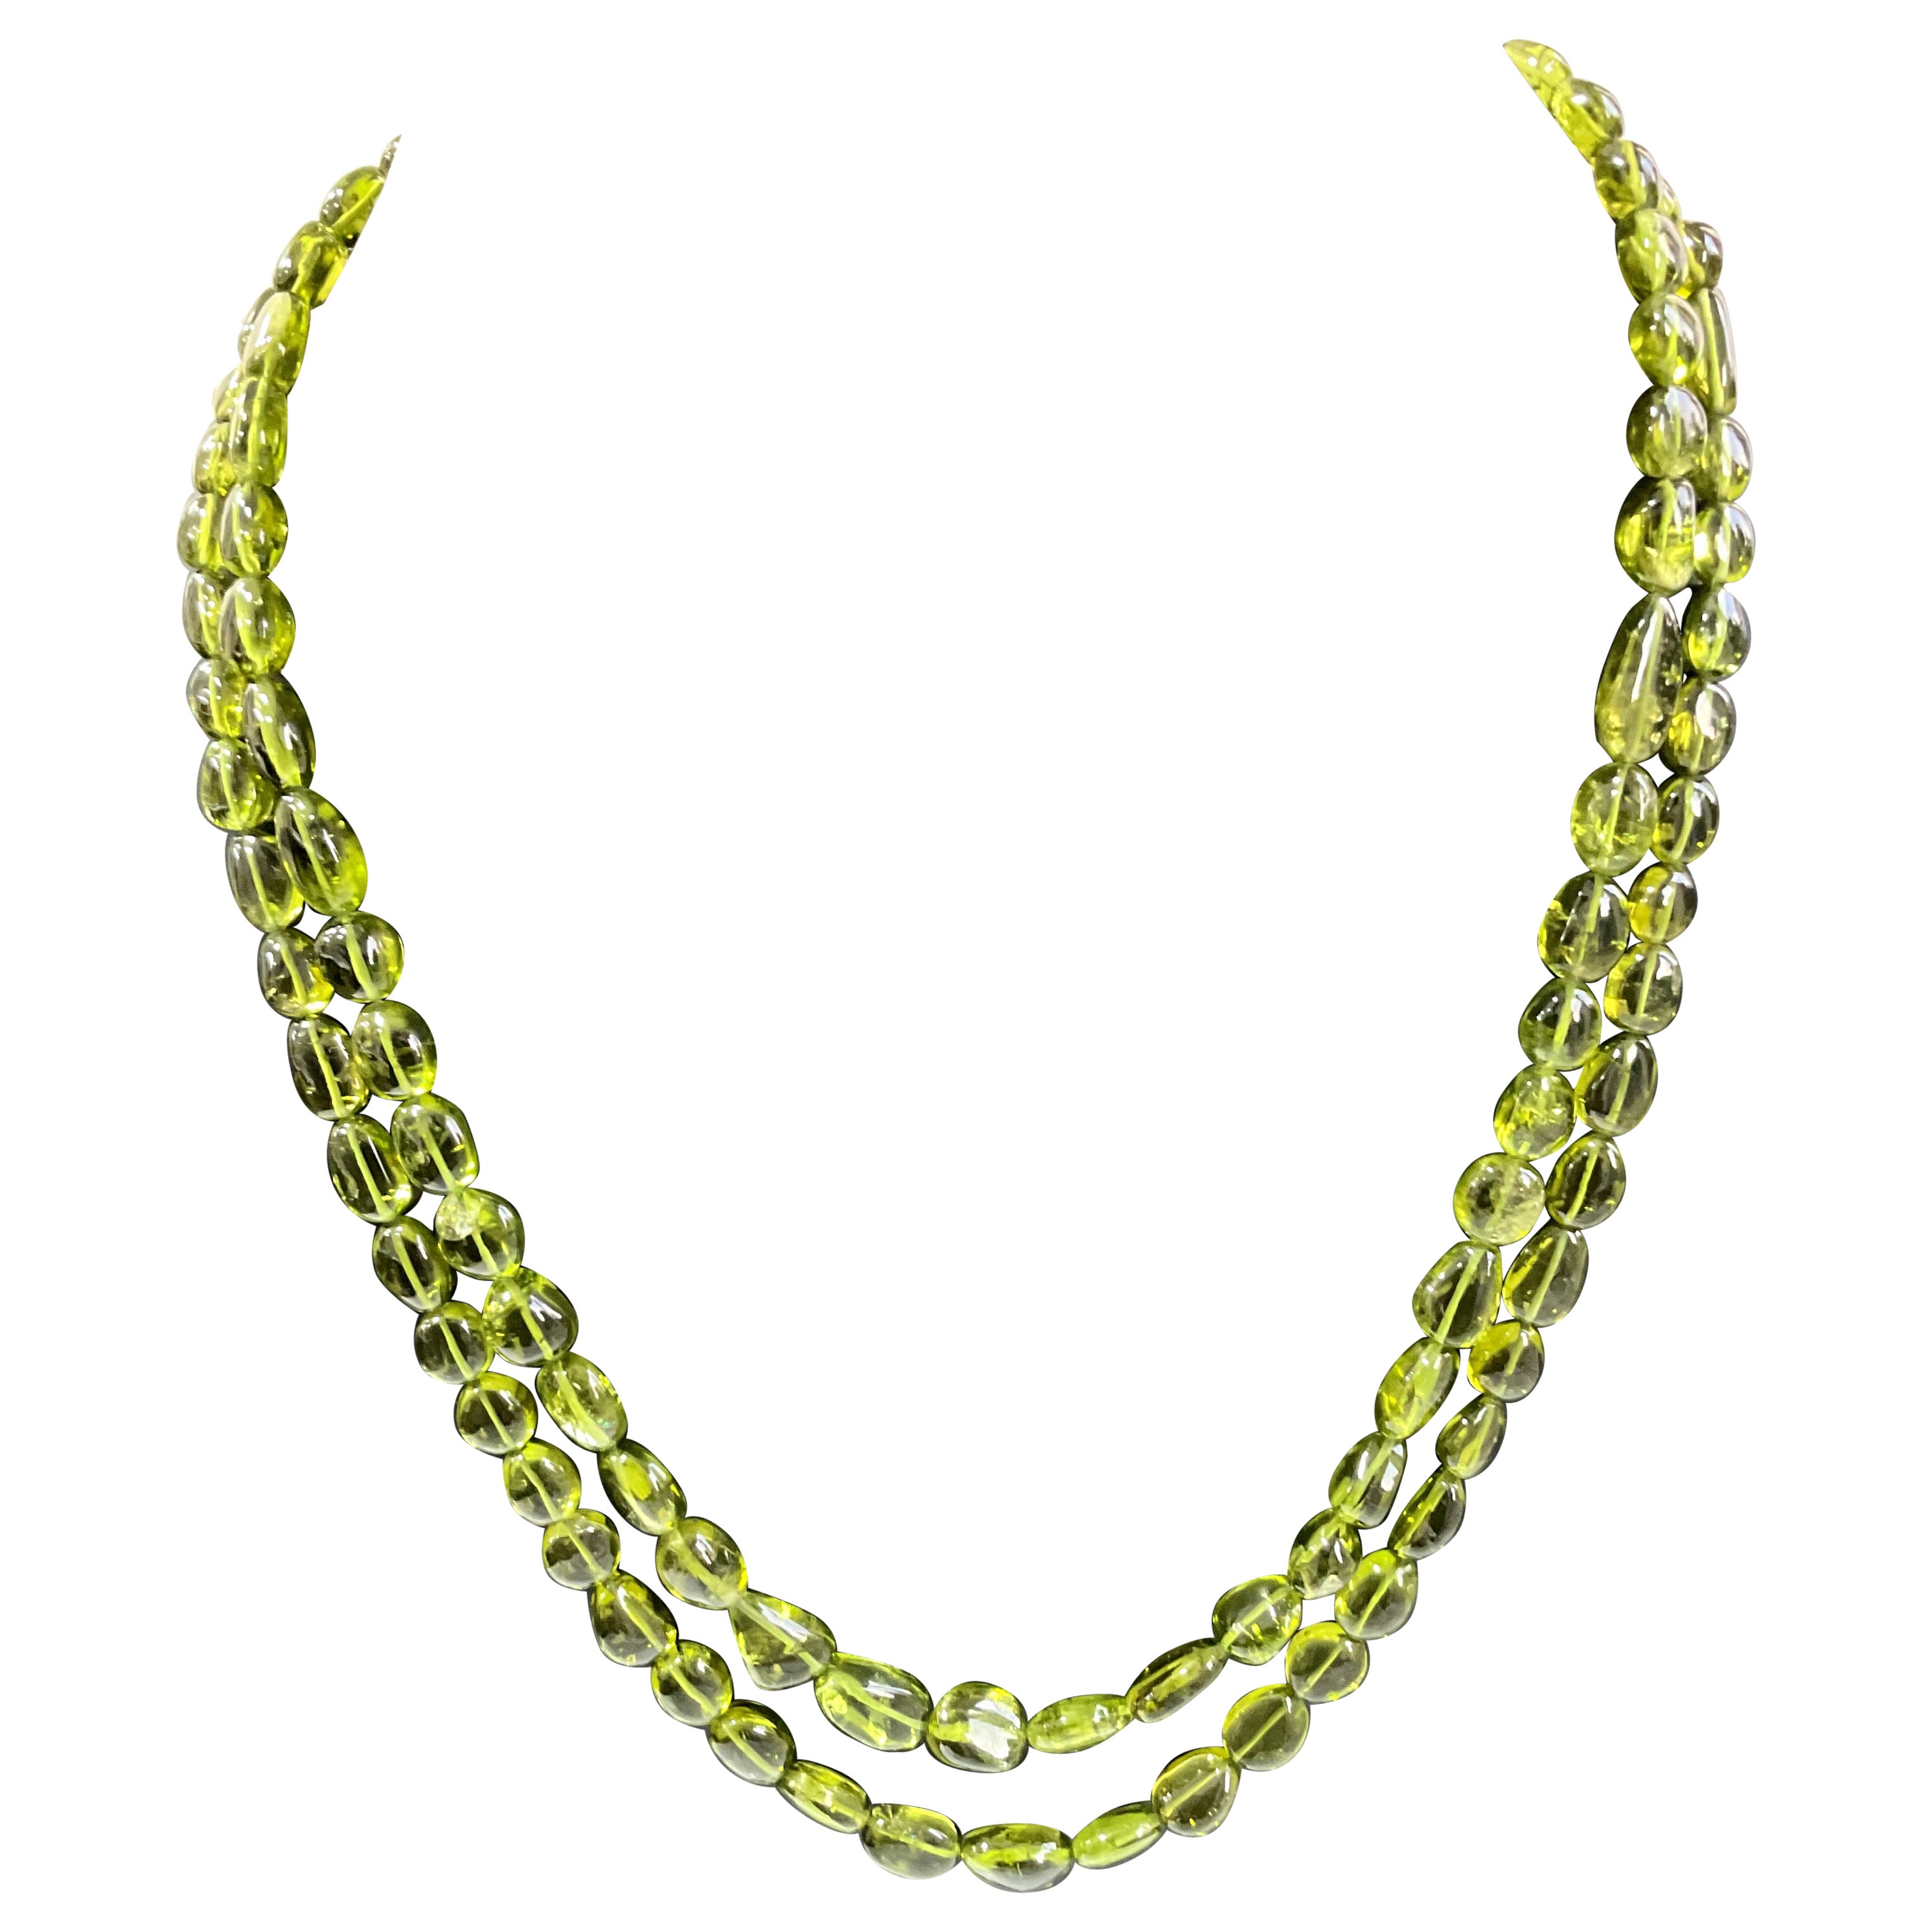 Top Quality 387.70 Carats Peridot Plain Tumbled Natural Gemstone Necklace For Sale